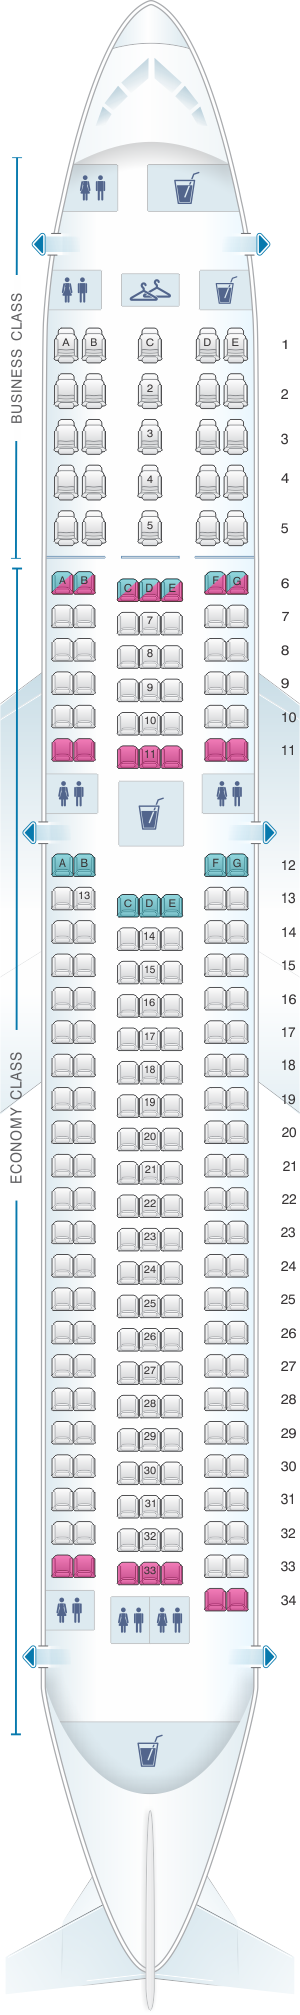 Seat map for MIAT Mongolian Airlines Boeing B767 300ER